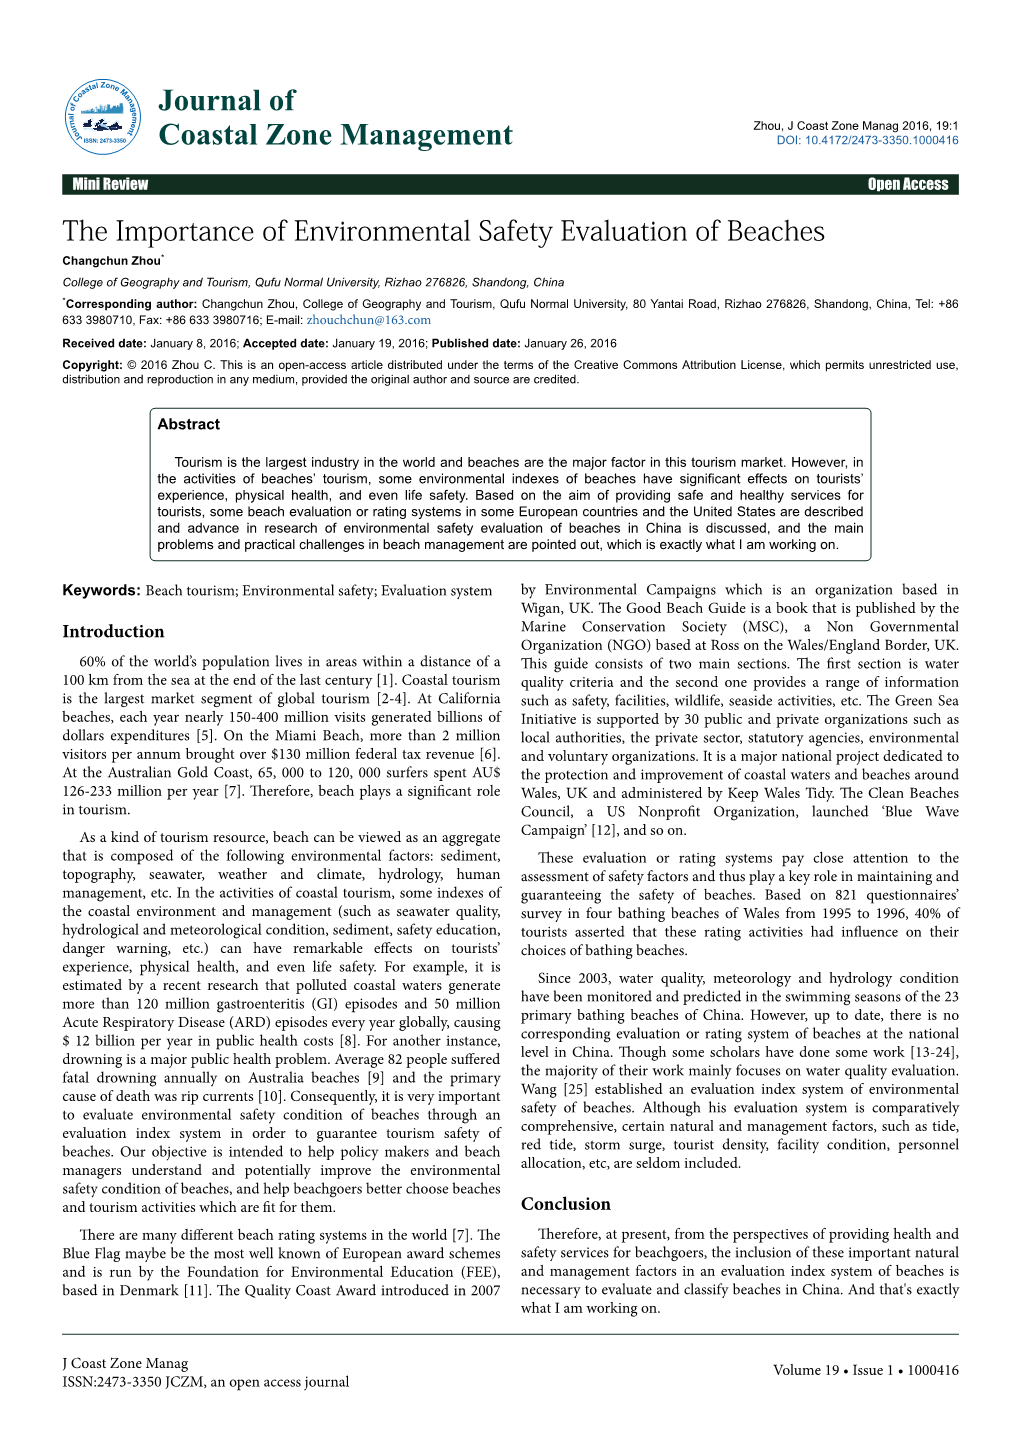 The Importance of Environmental Safety Evaluation of Beaches